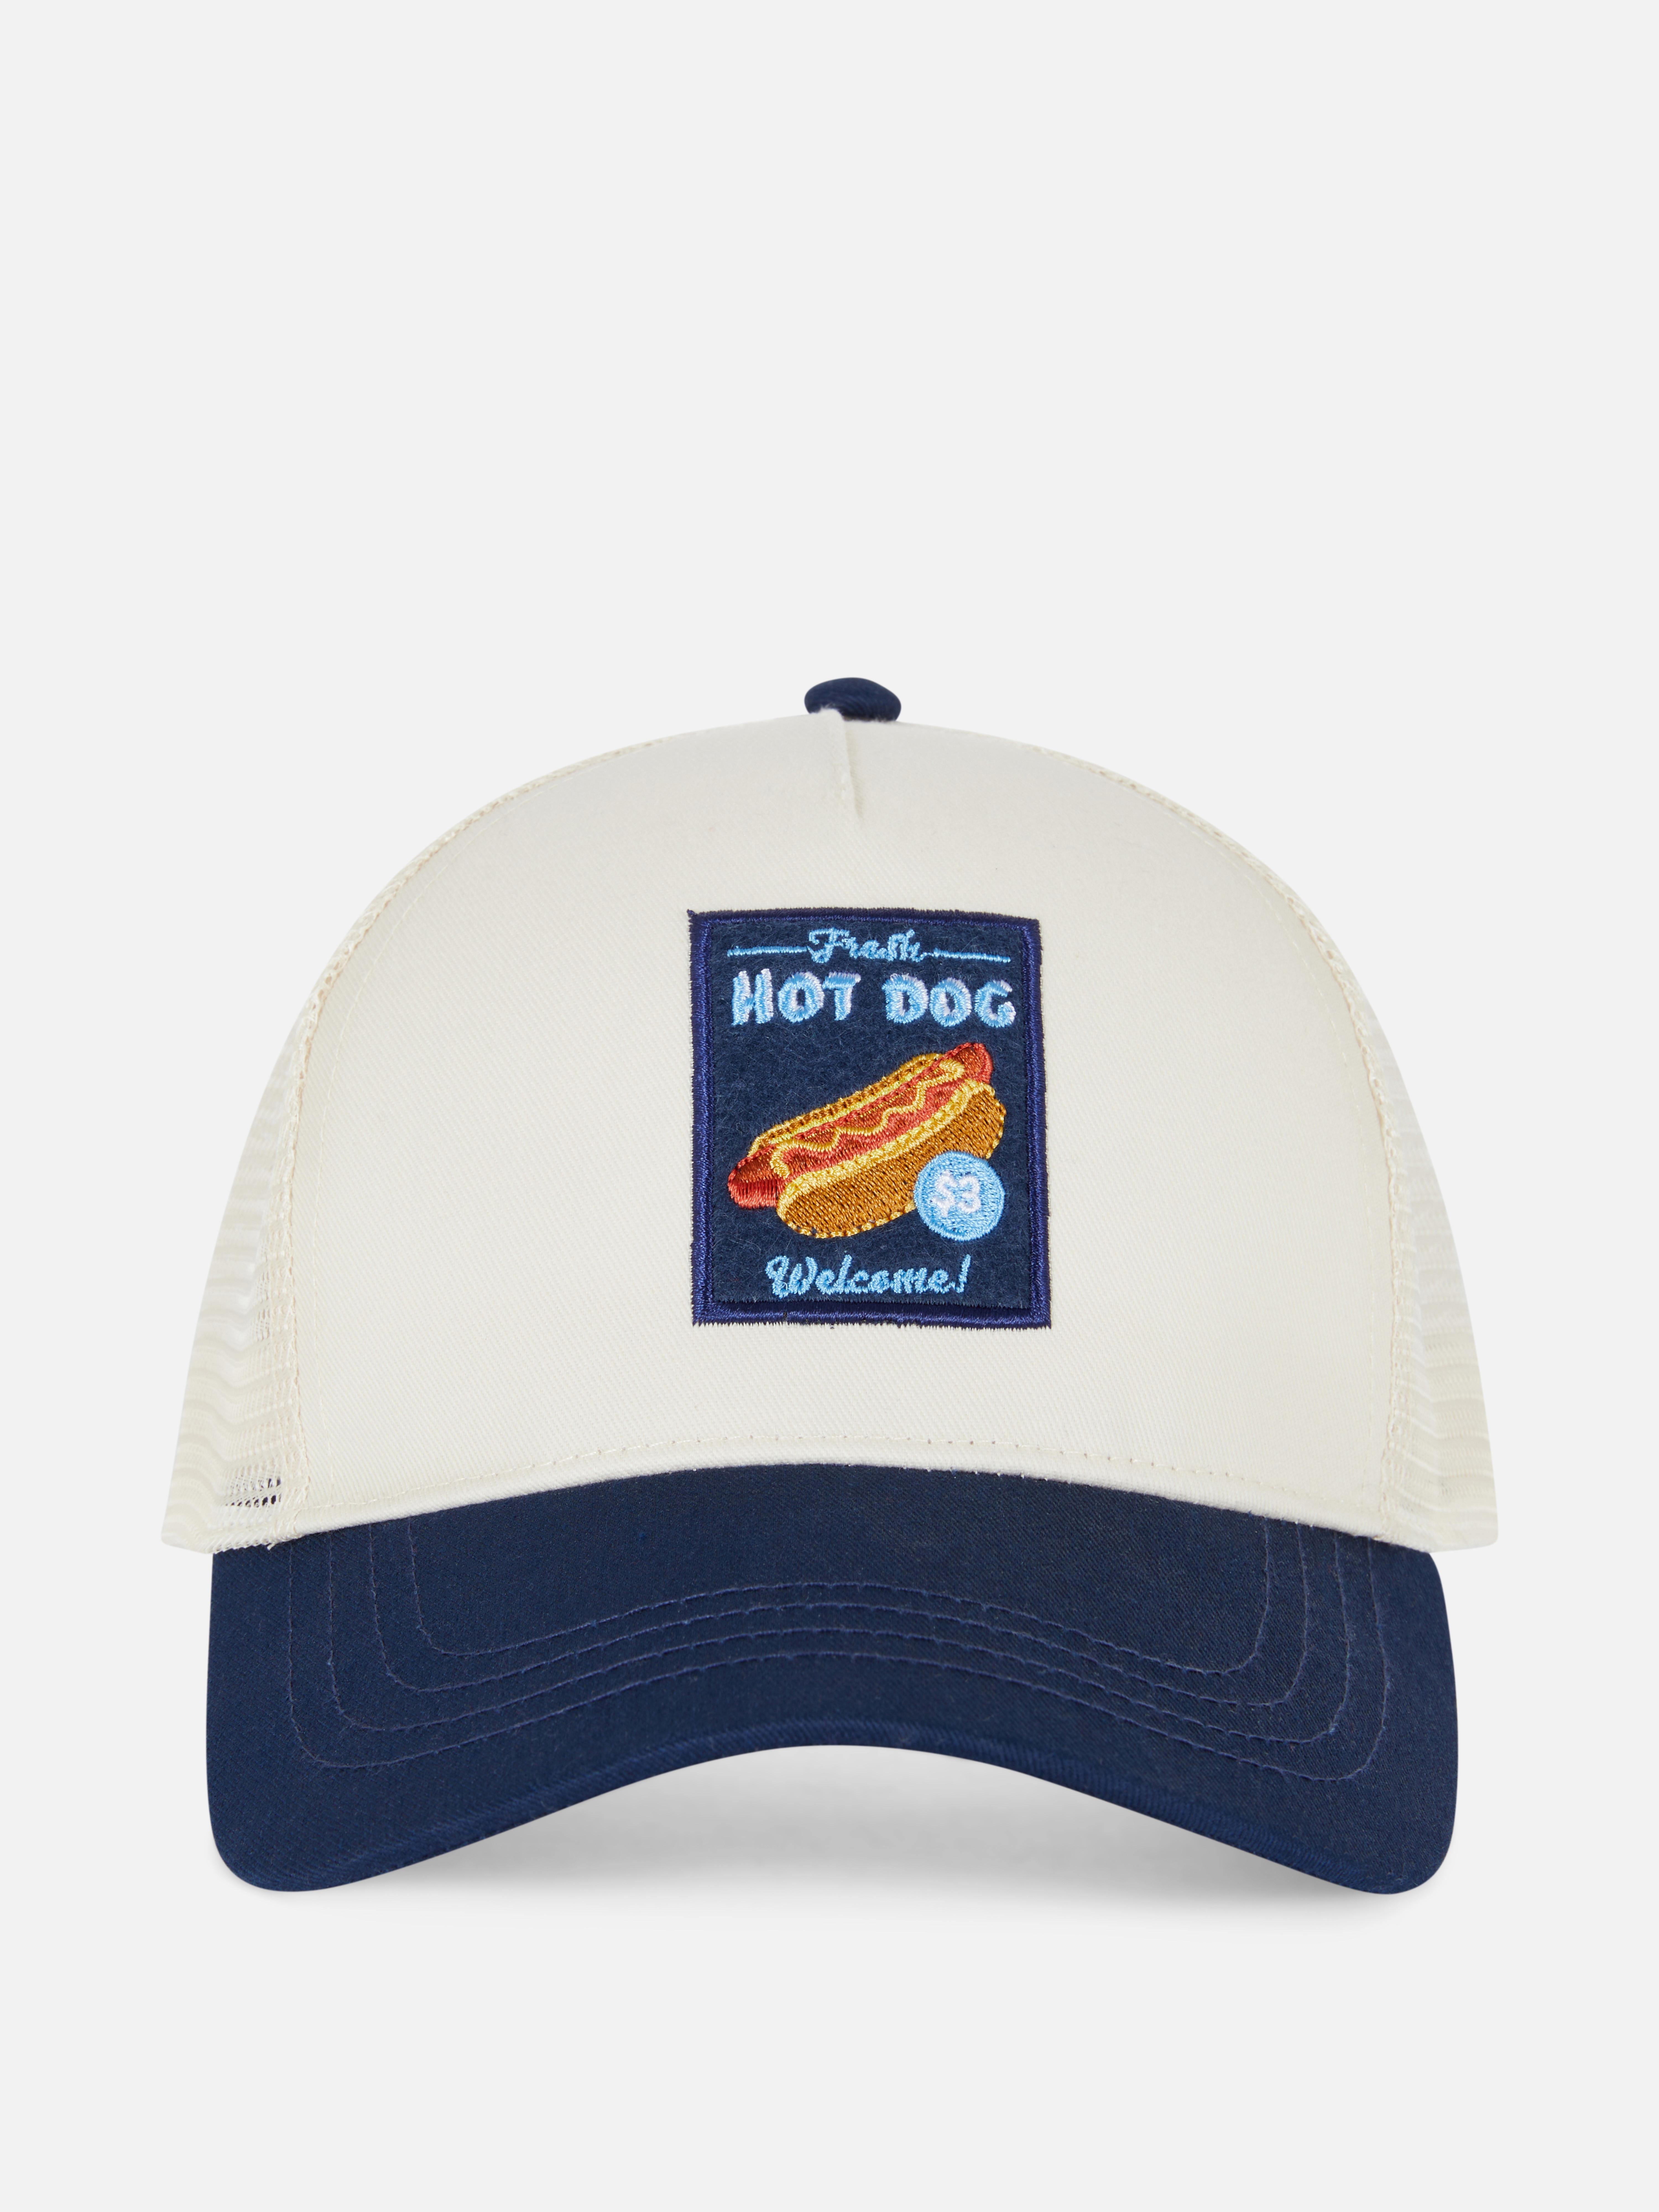 Hot dog Embroidered Trucker Cap